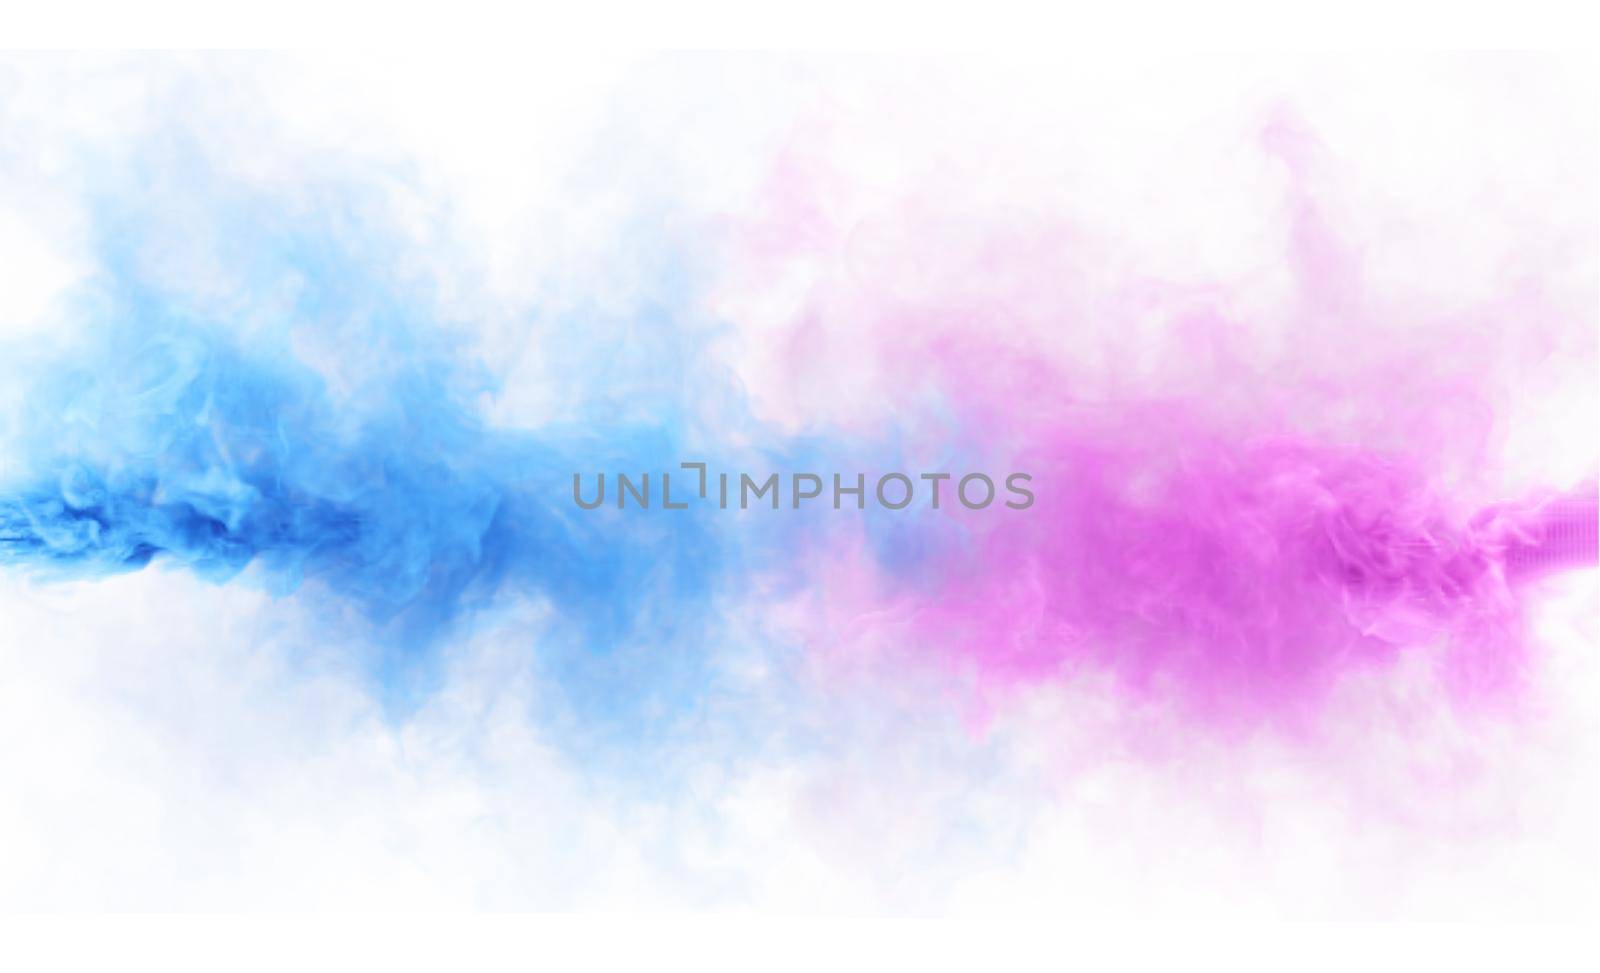 Magenta and Blue mystery smoke texture background. Duo colors fog. 3D render abstract art for fest and fan party